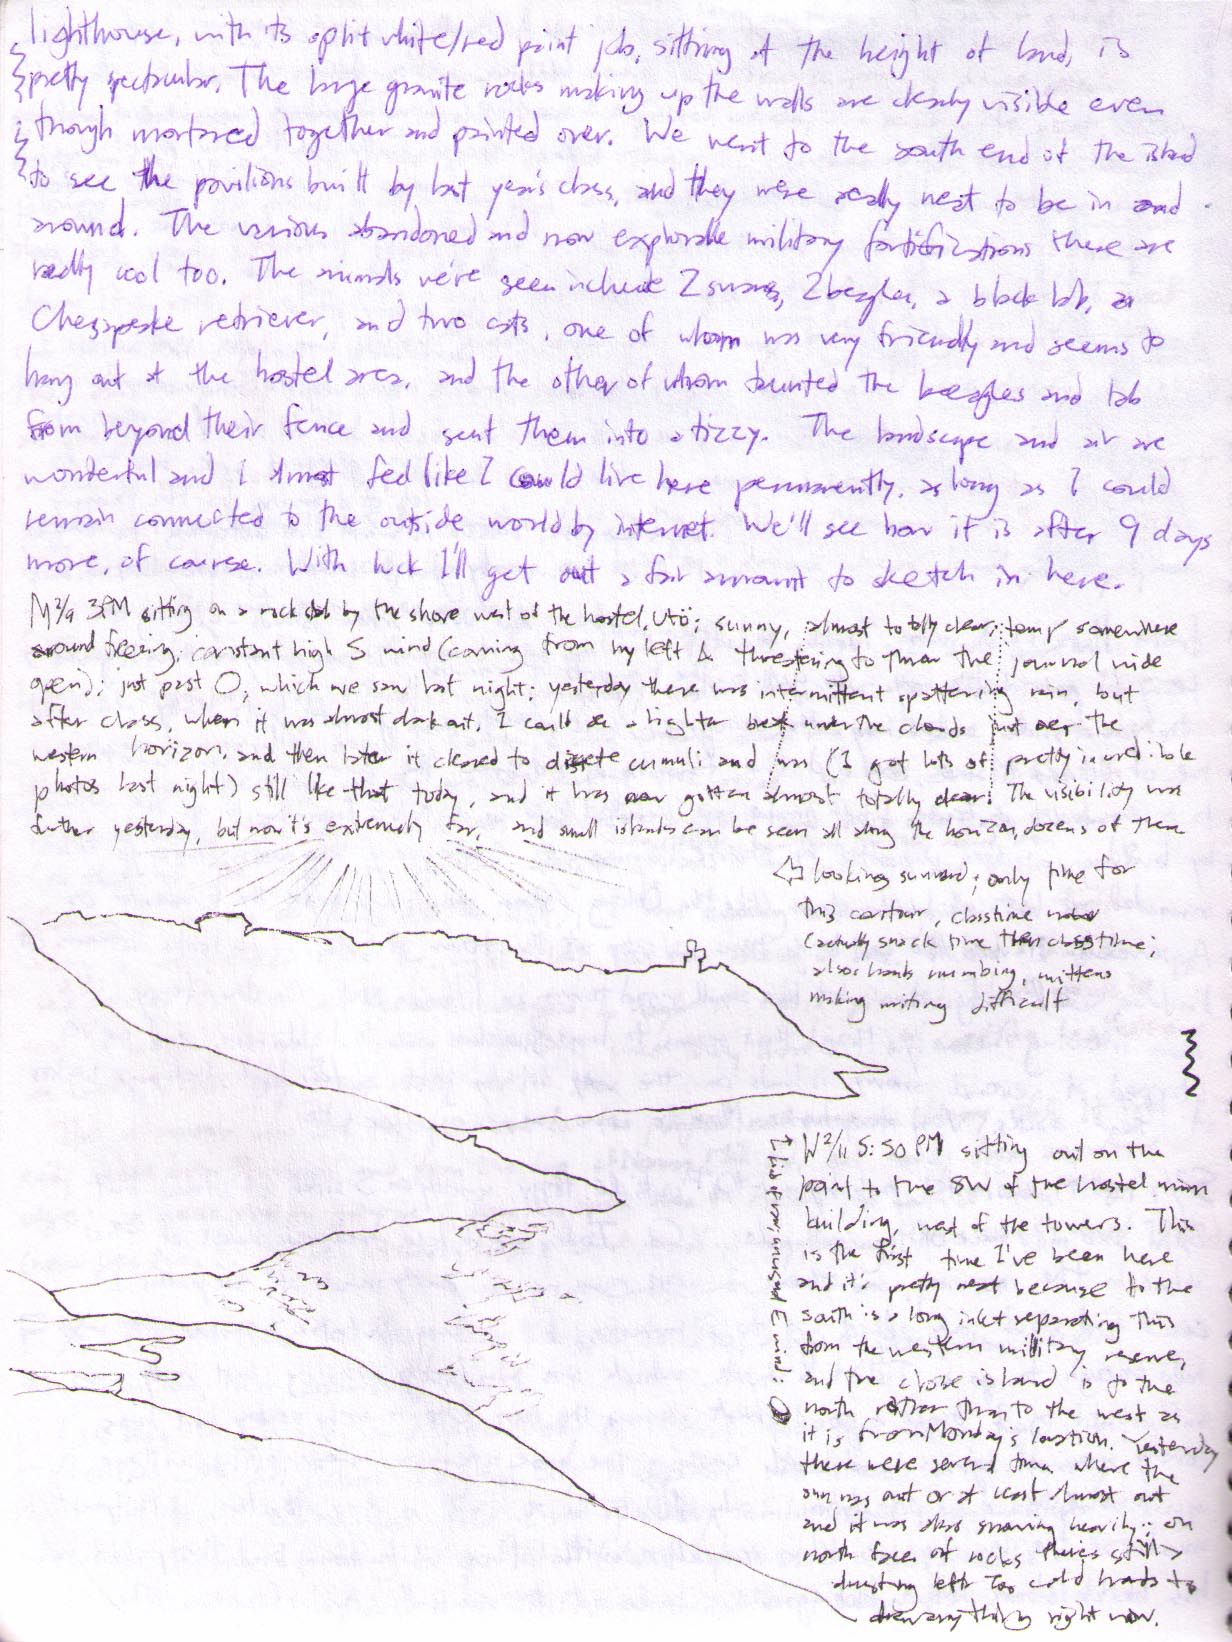 Large scan of nature journal page 3.